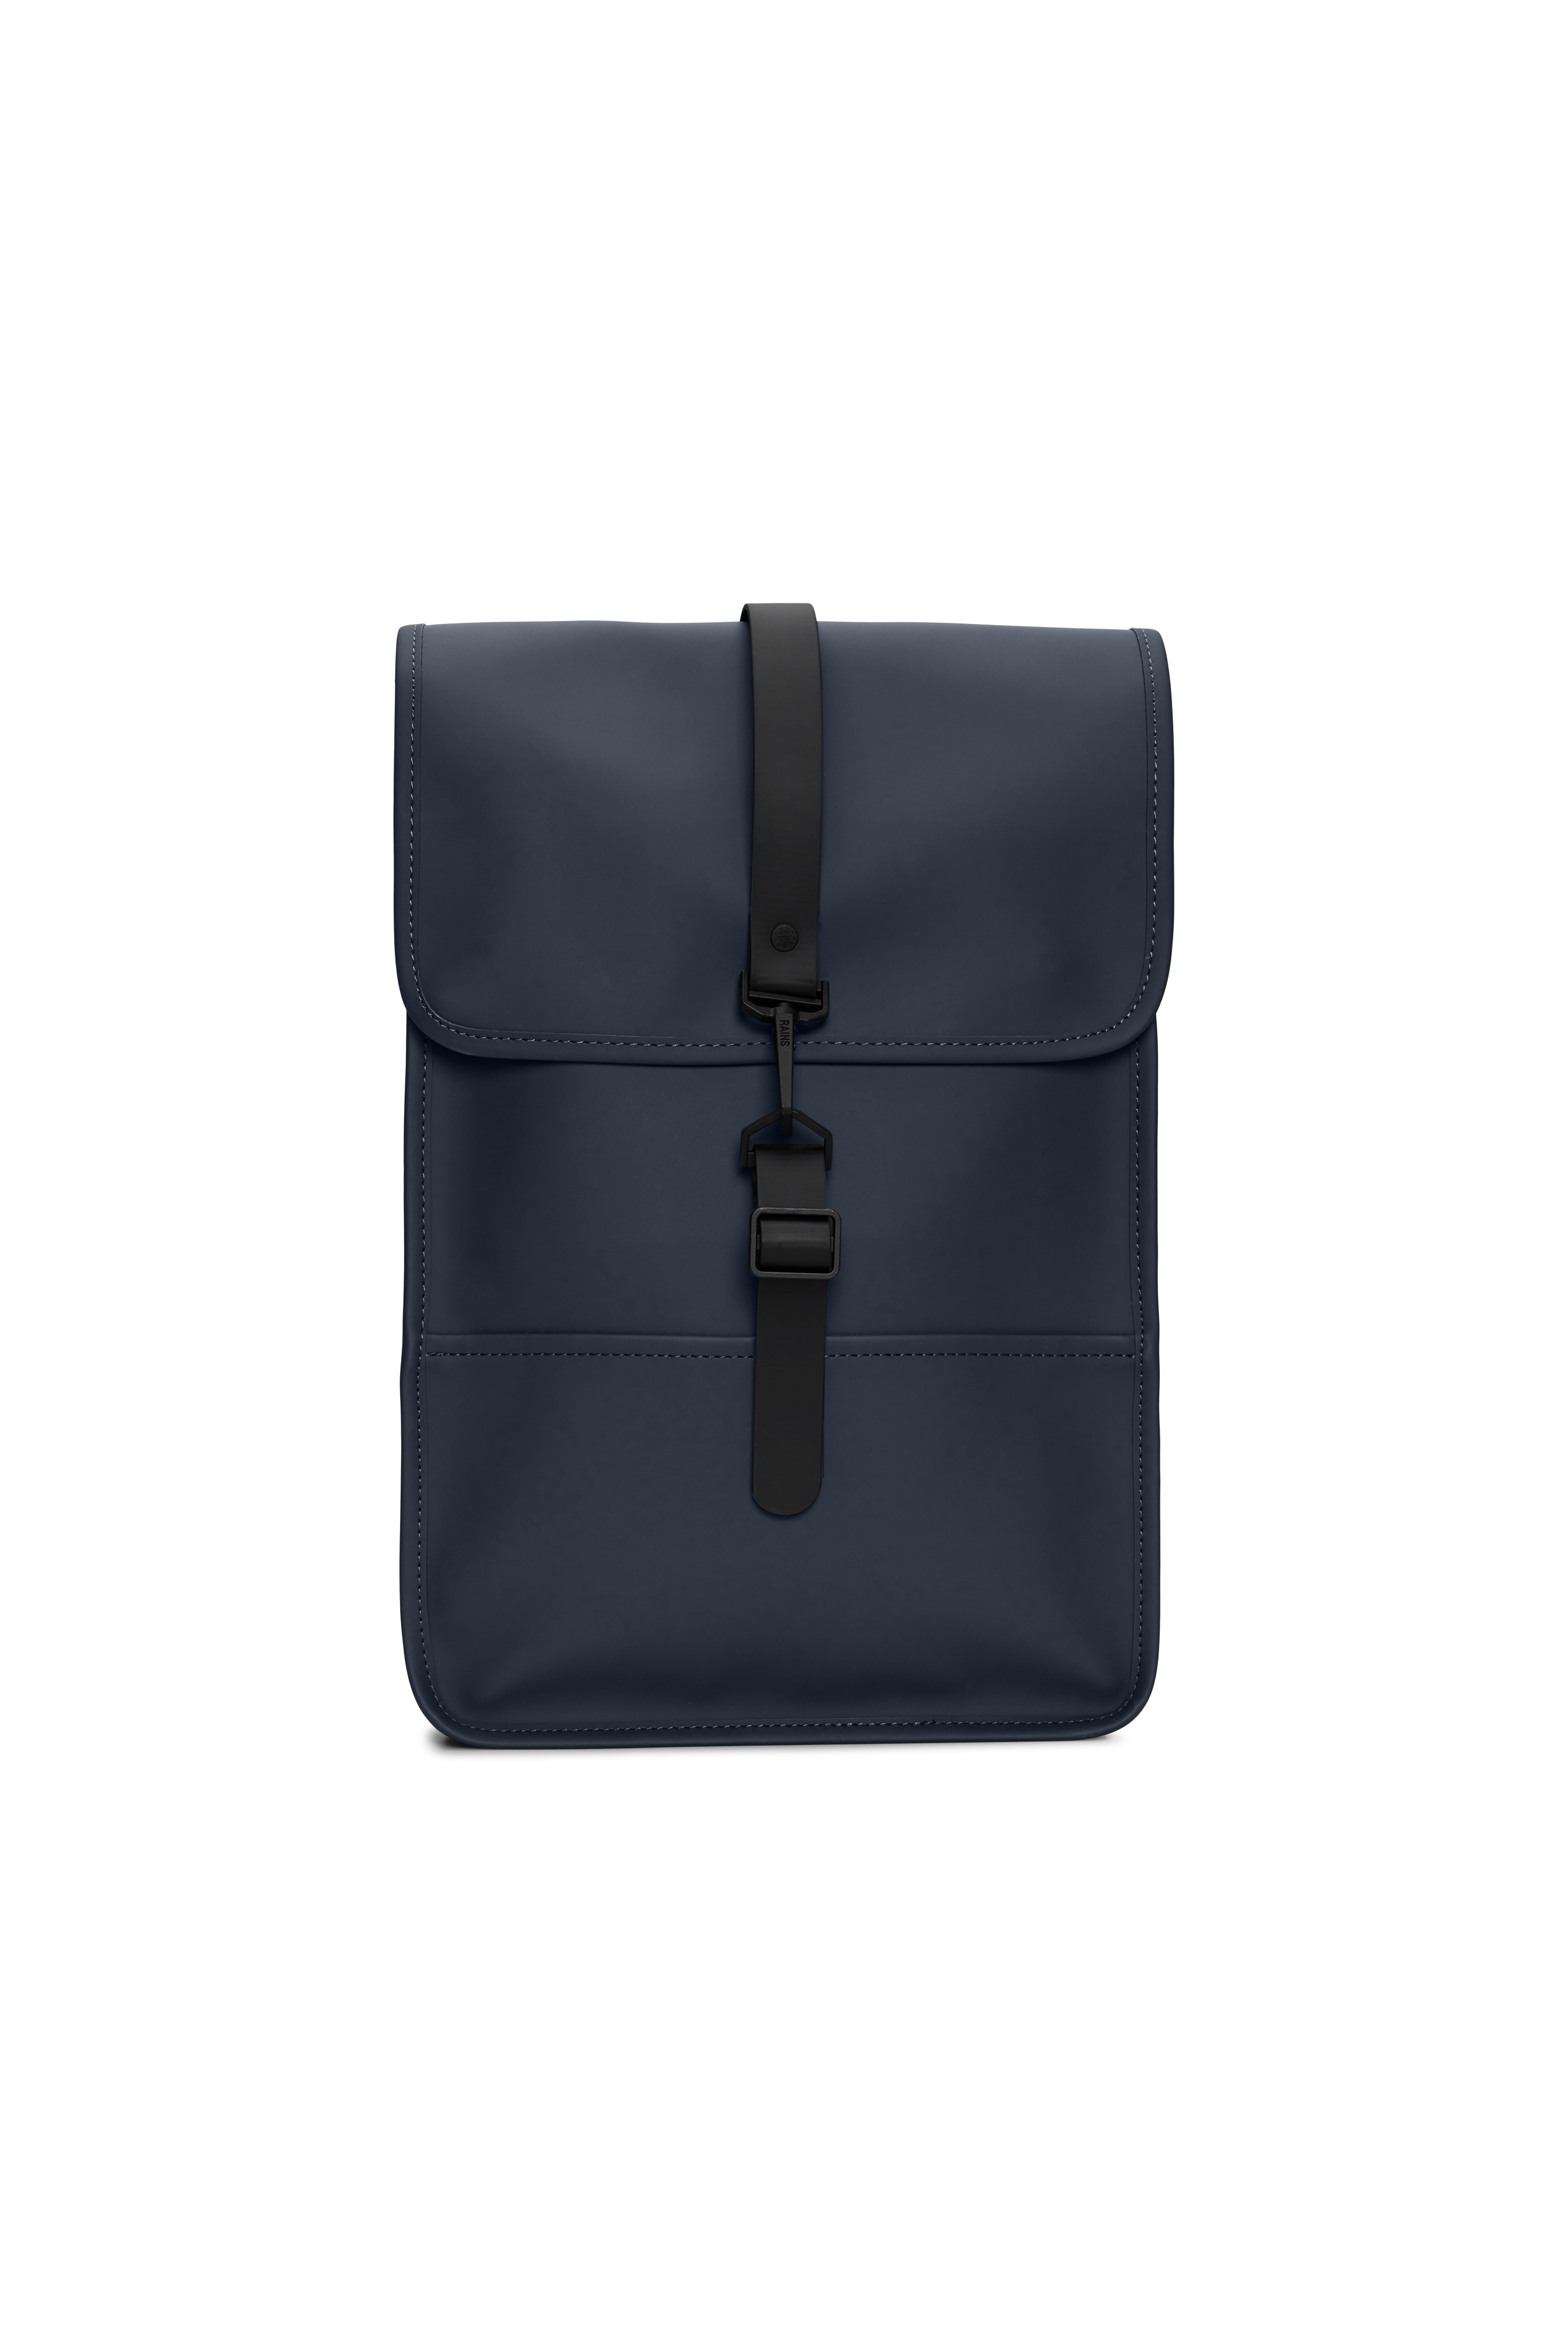 Rains® Backpack Mini in Black for $160 | Free Shipping